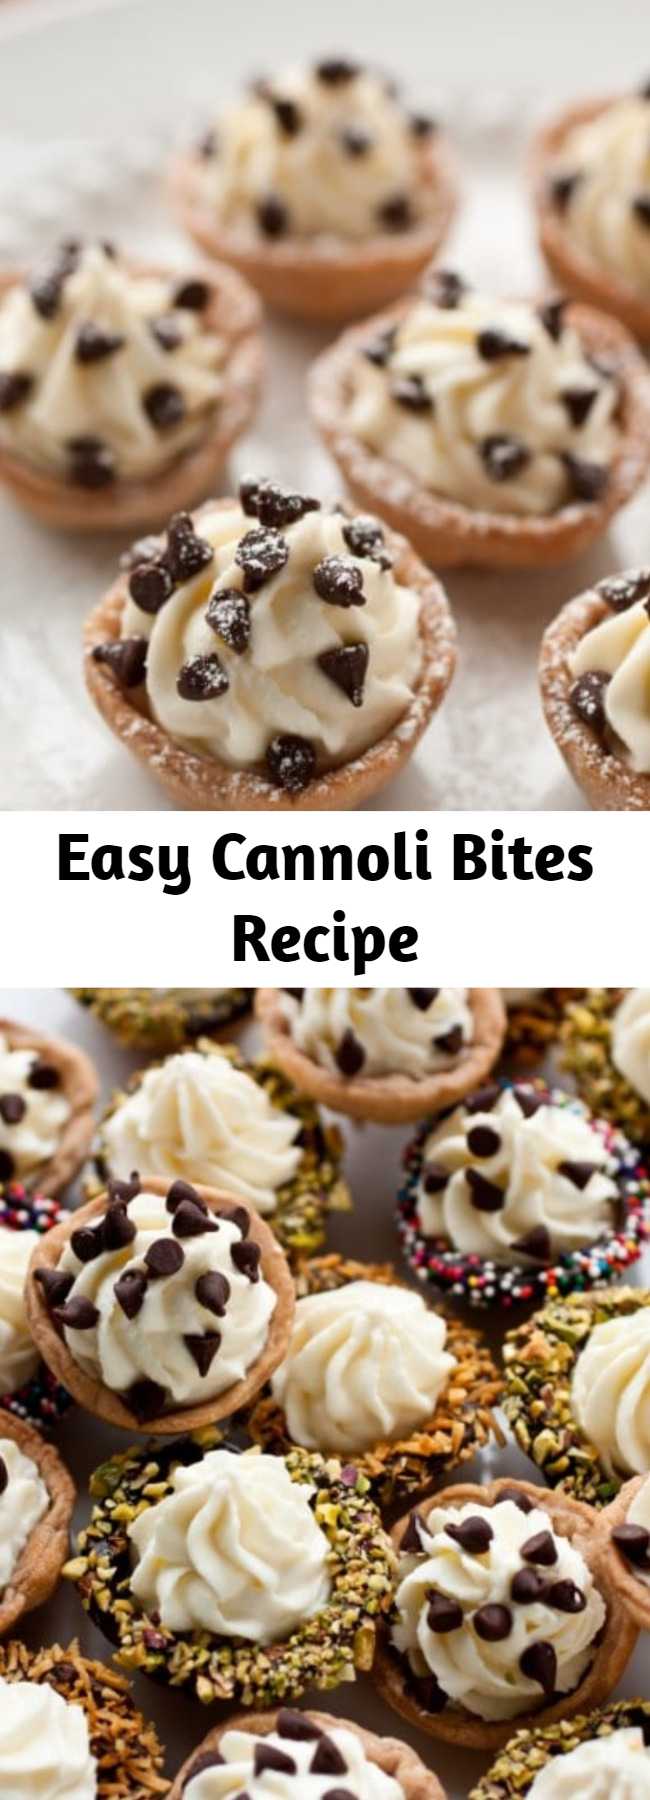 Easy Cannoli Bites Recipe - All the flavors of cannoli in mini oven baked treats. Made with a crisp pastry shell, filled with a sweet ricotta filling and finished with chocolate chips. Who could resist this tempting treat?